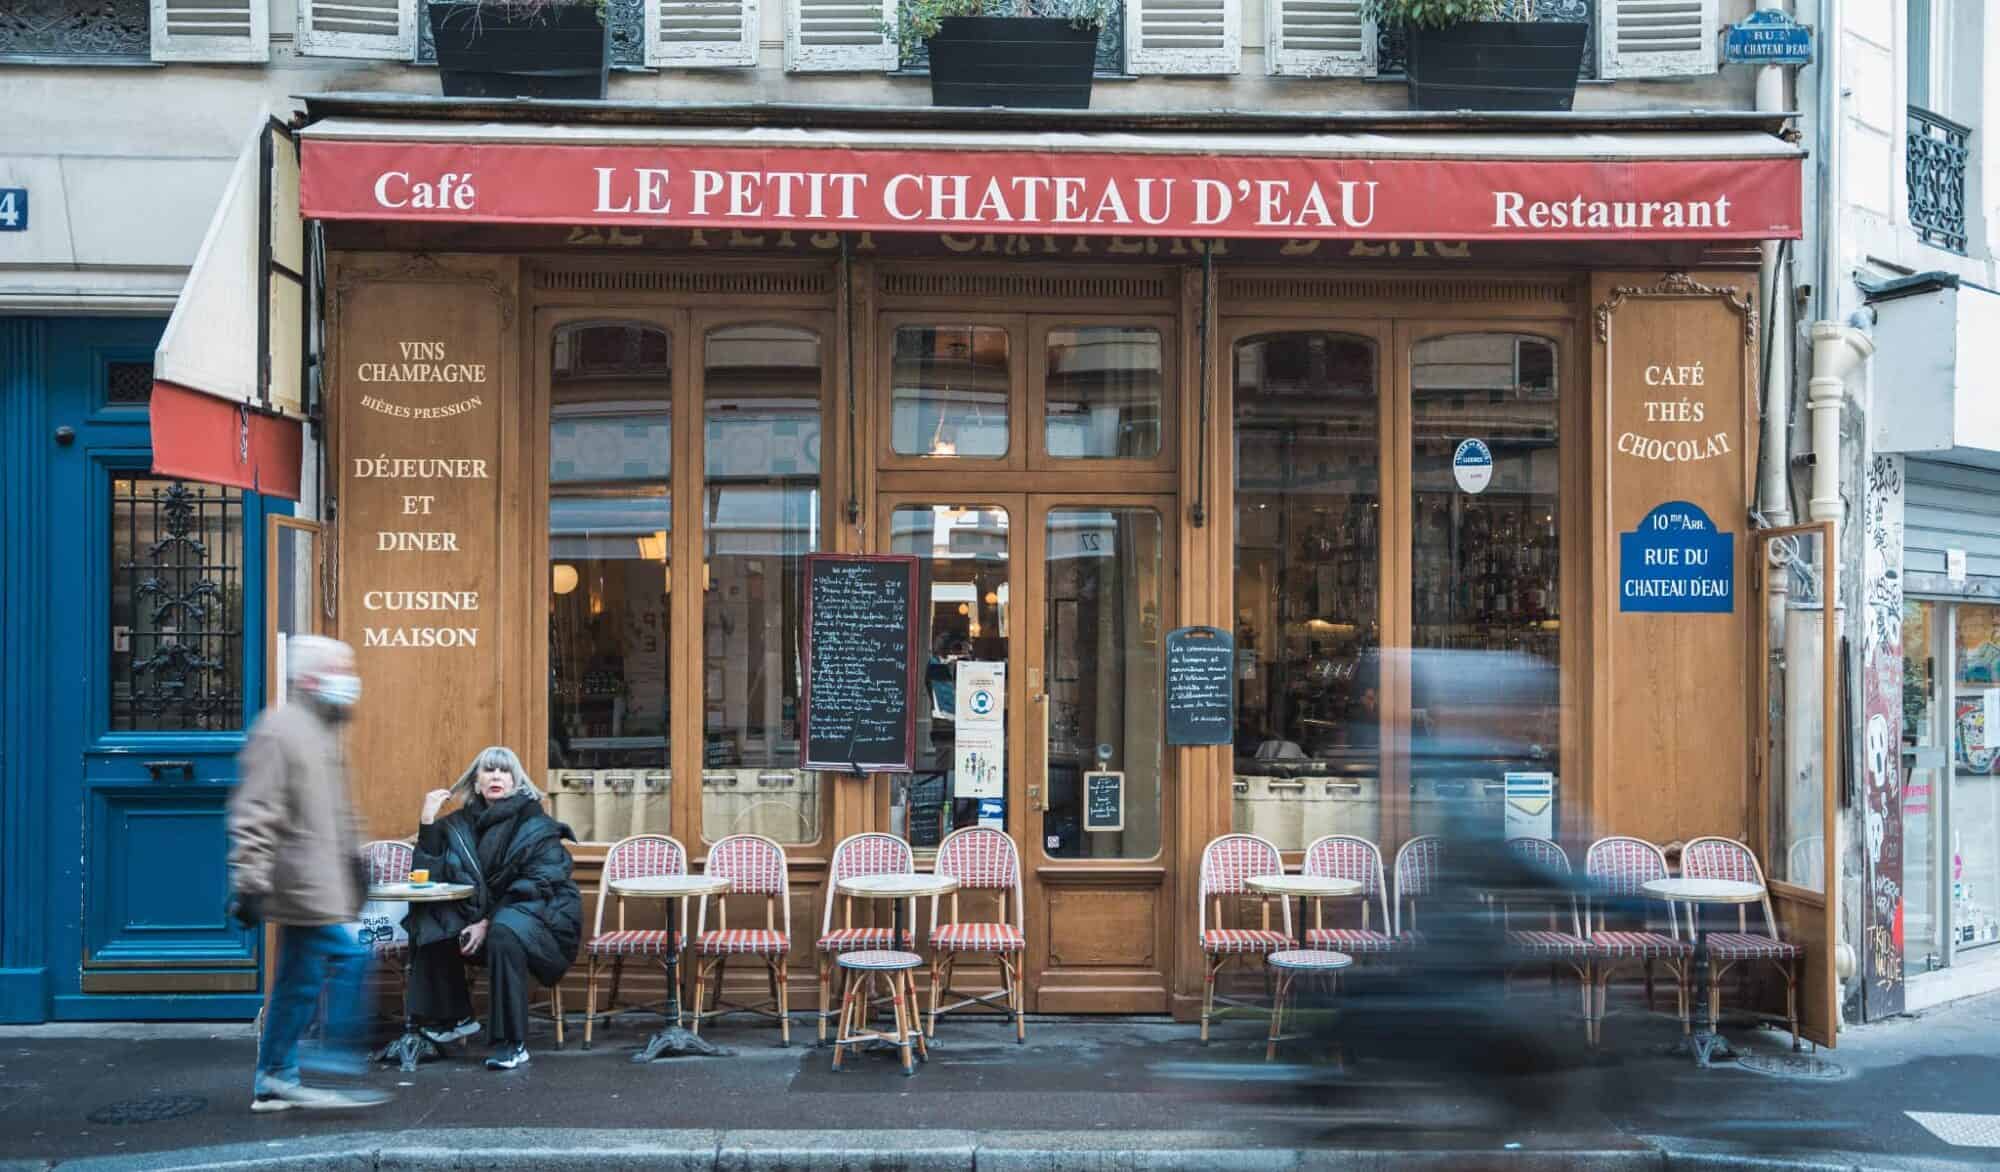 Two people dressed in winter coats sit on red and white checkered chairs outside the Le Petit Chateau D'Eau café in Paris.